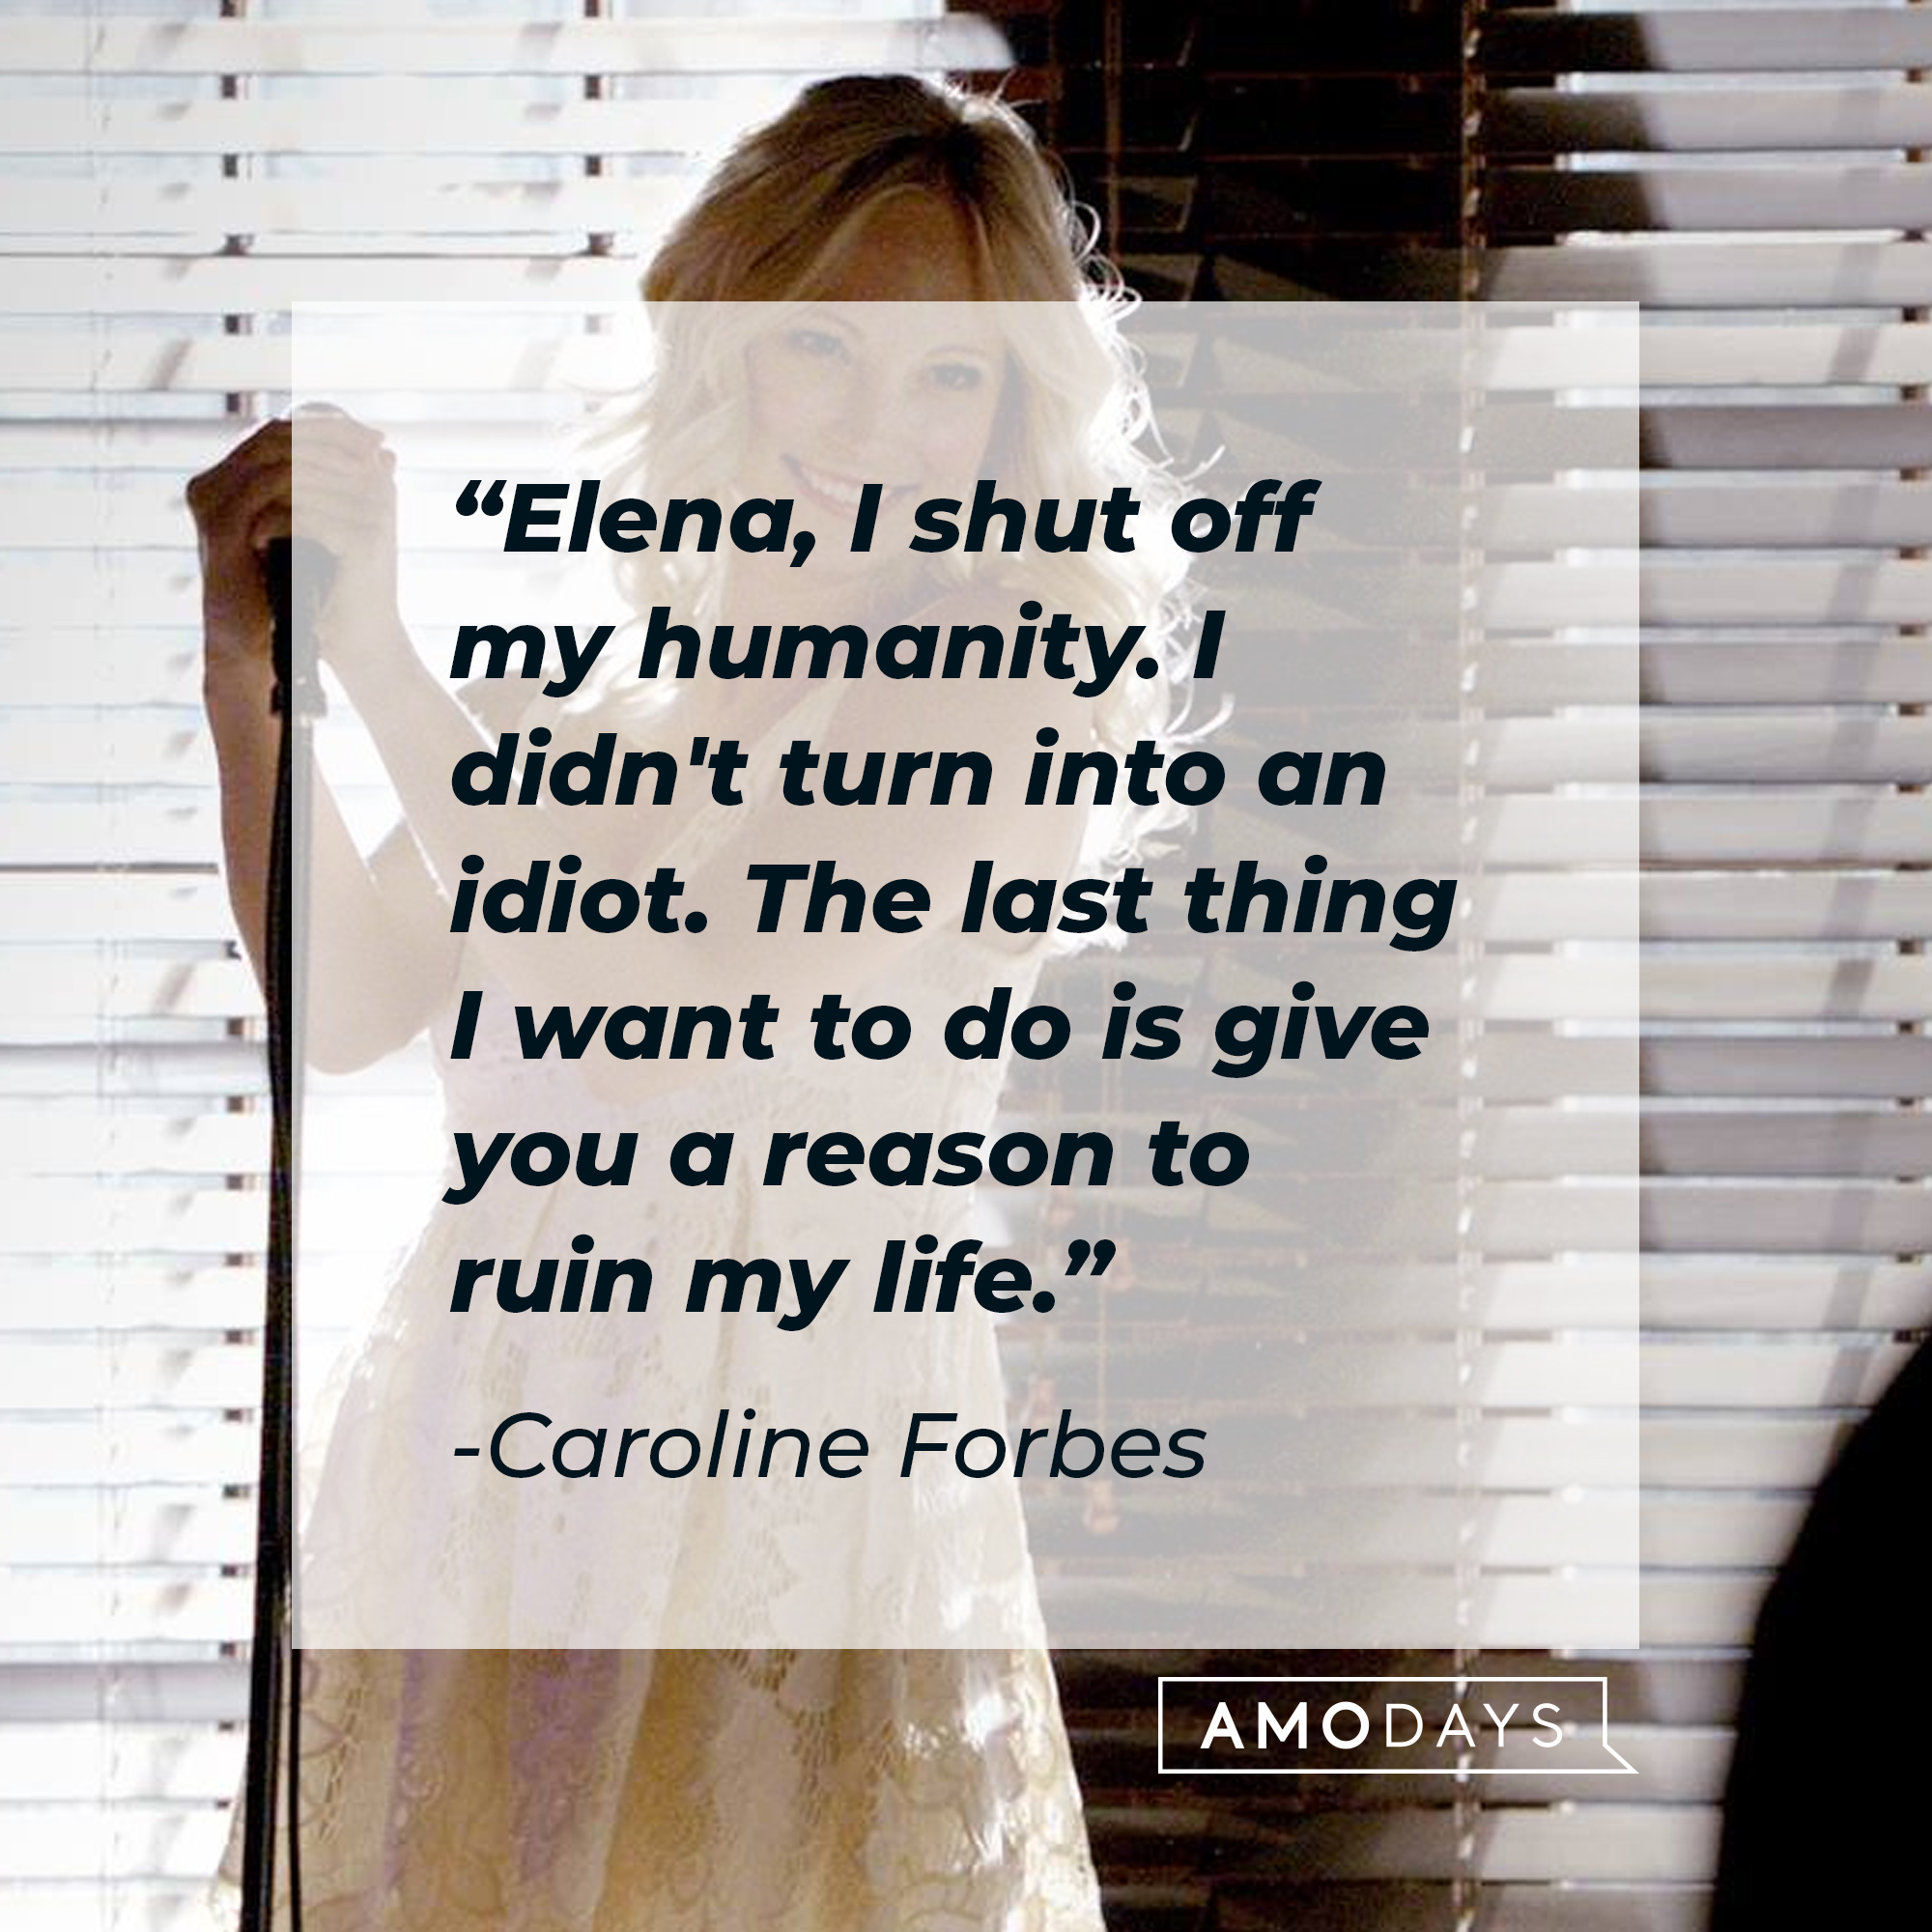 Caroline Forbes' quote: "Elena, I shut off my humanity. I didn't turn into an idiot. The last thing I want to do is give you a reason to ruin my life." | Source: Facebook.com/thevampirediaries